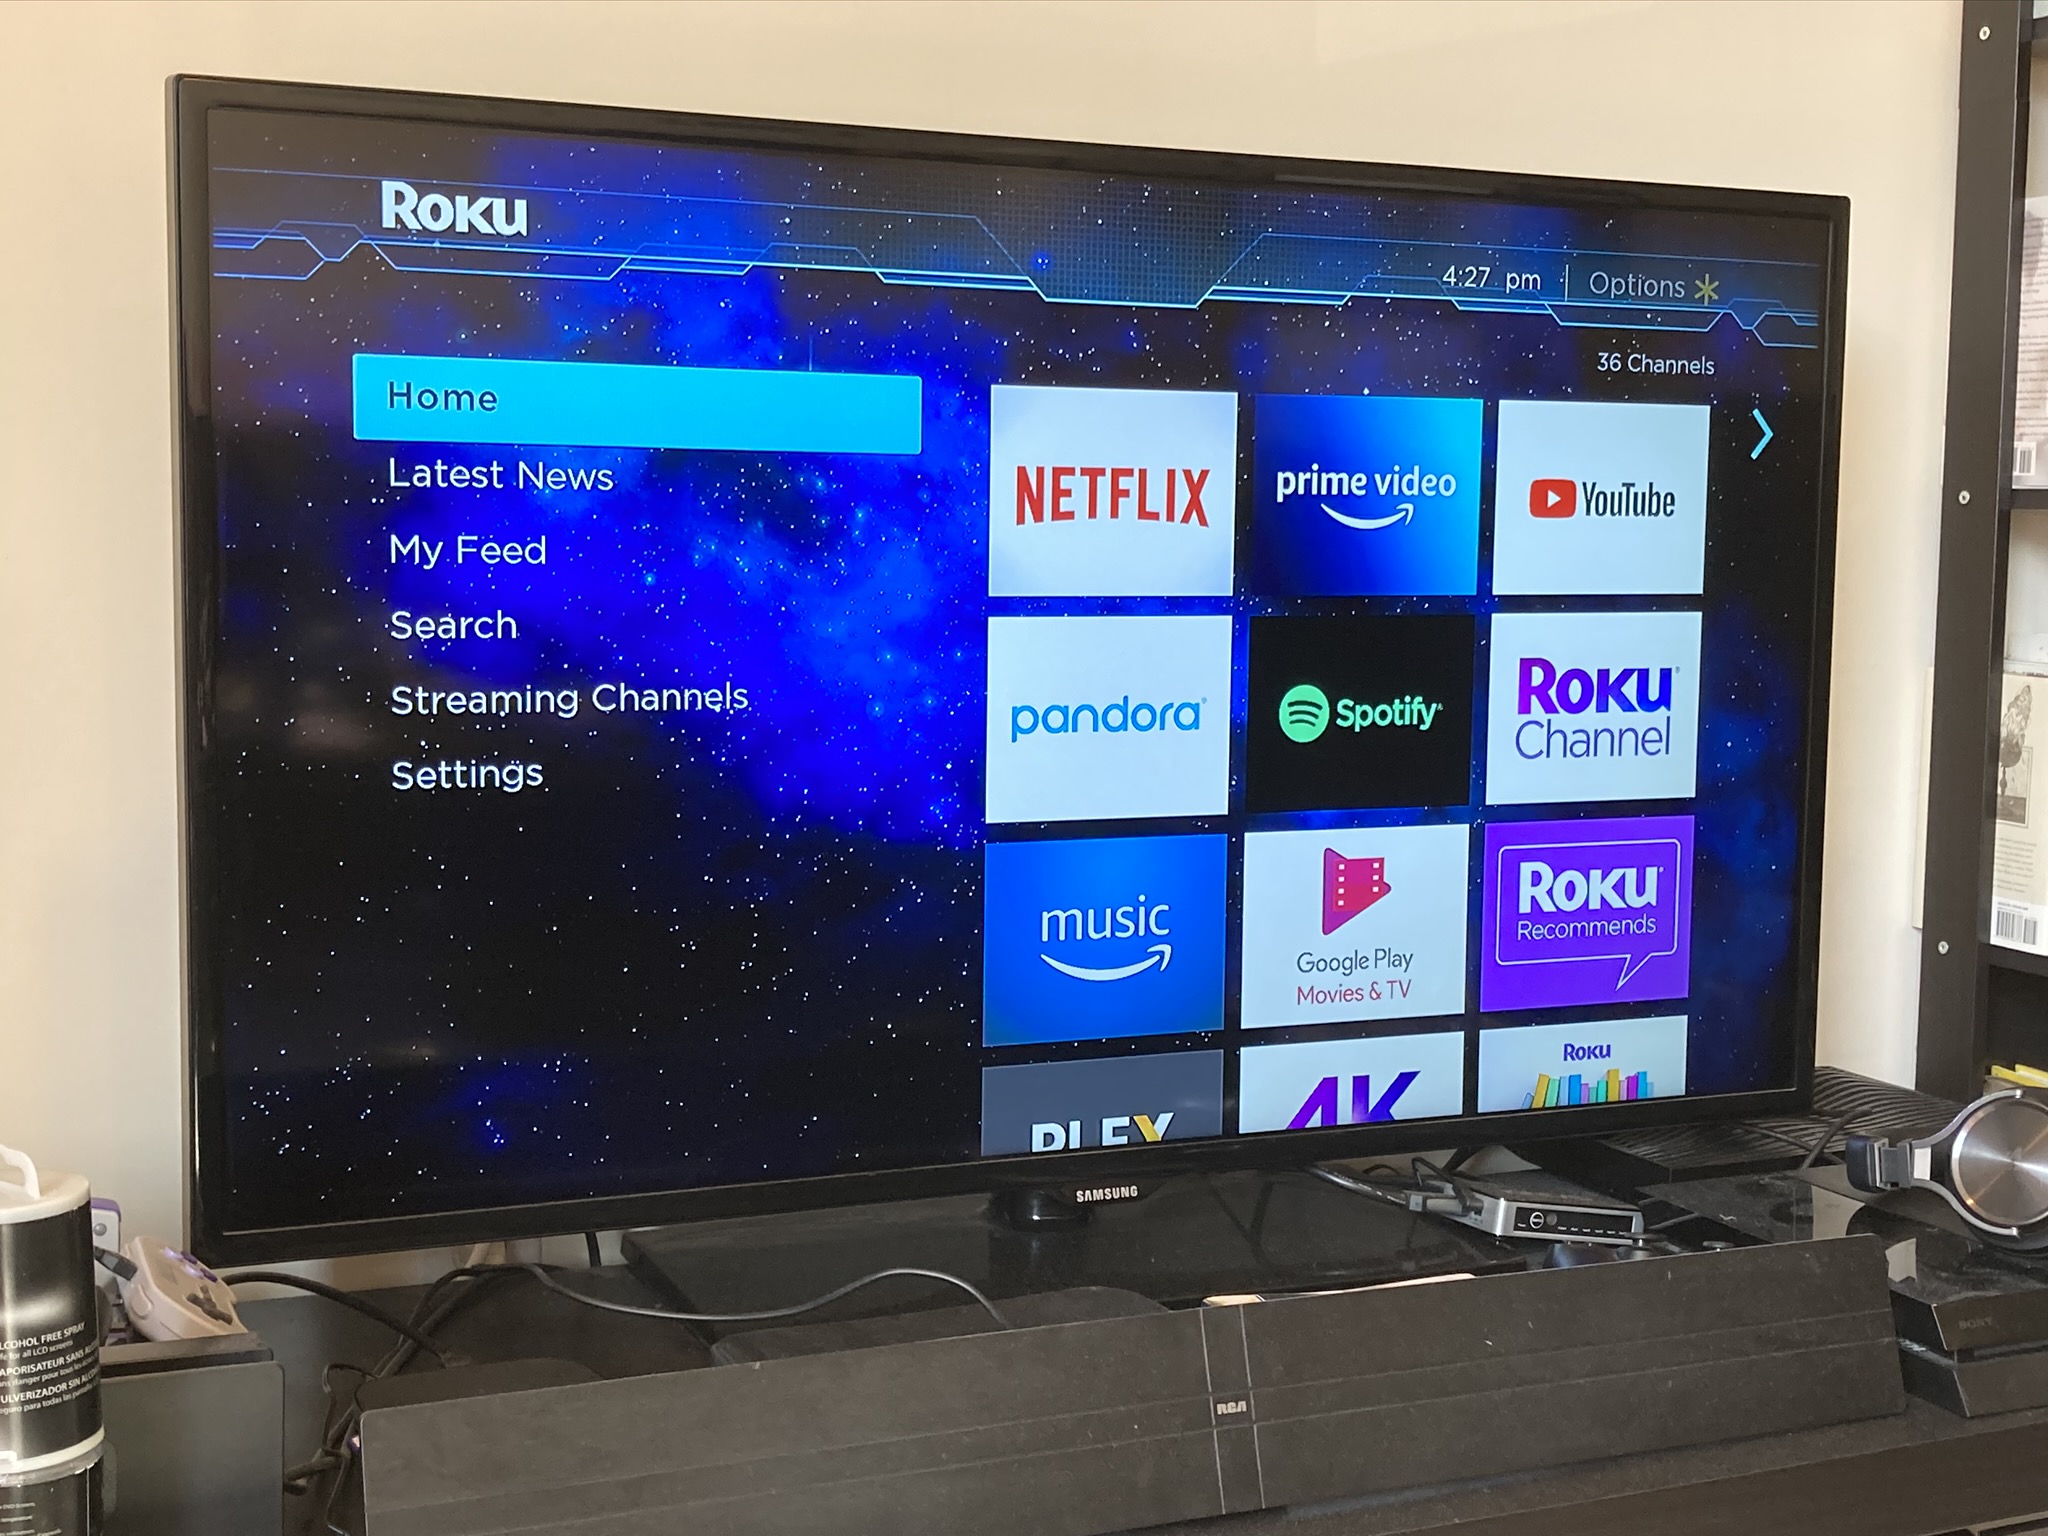 How to turn off subtitles on Roku